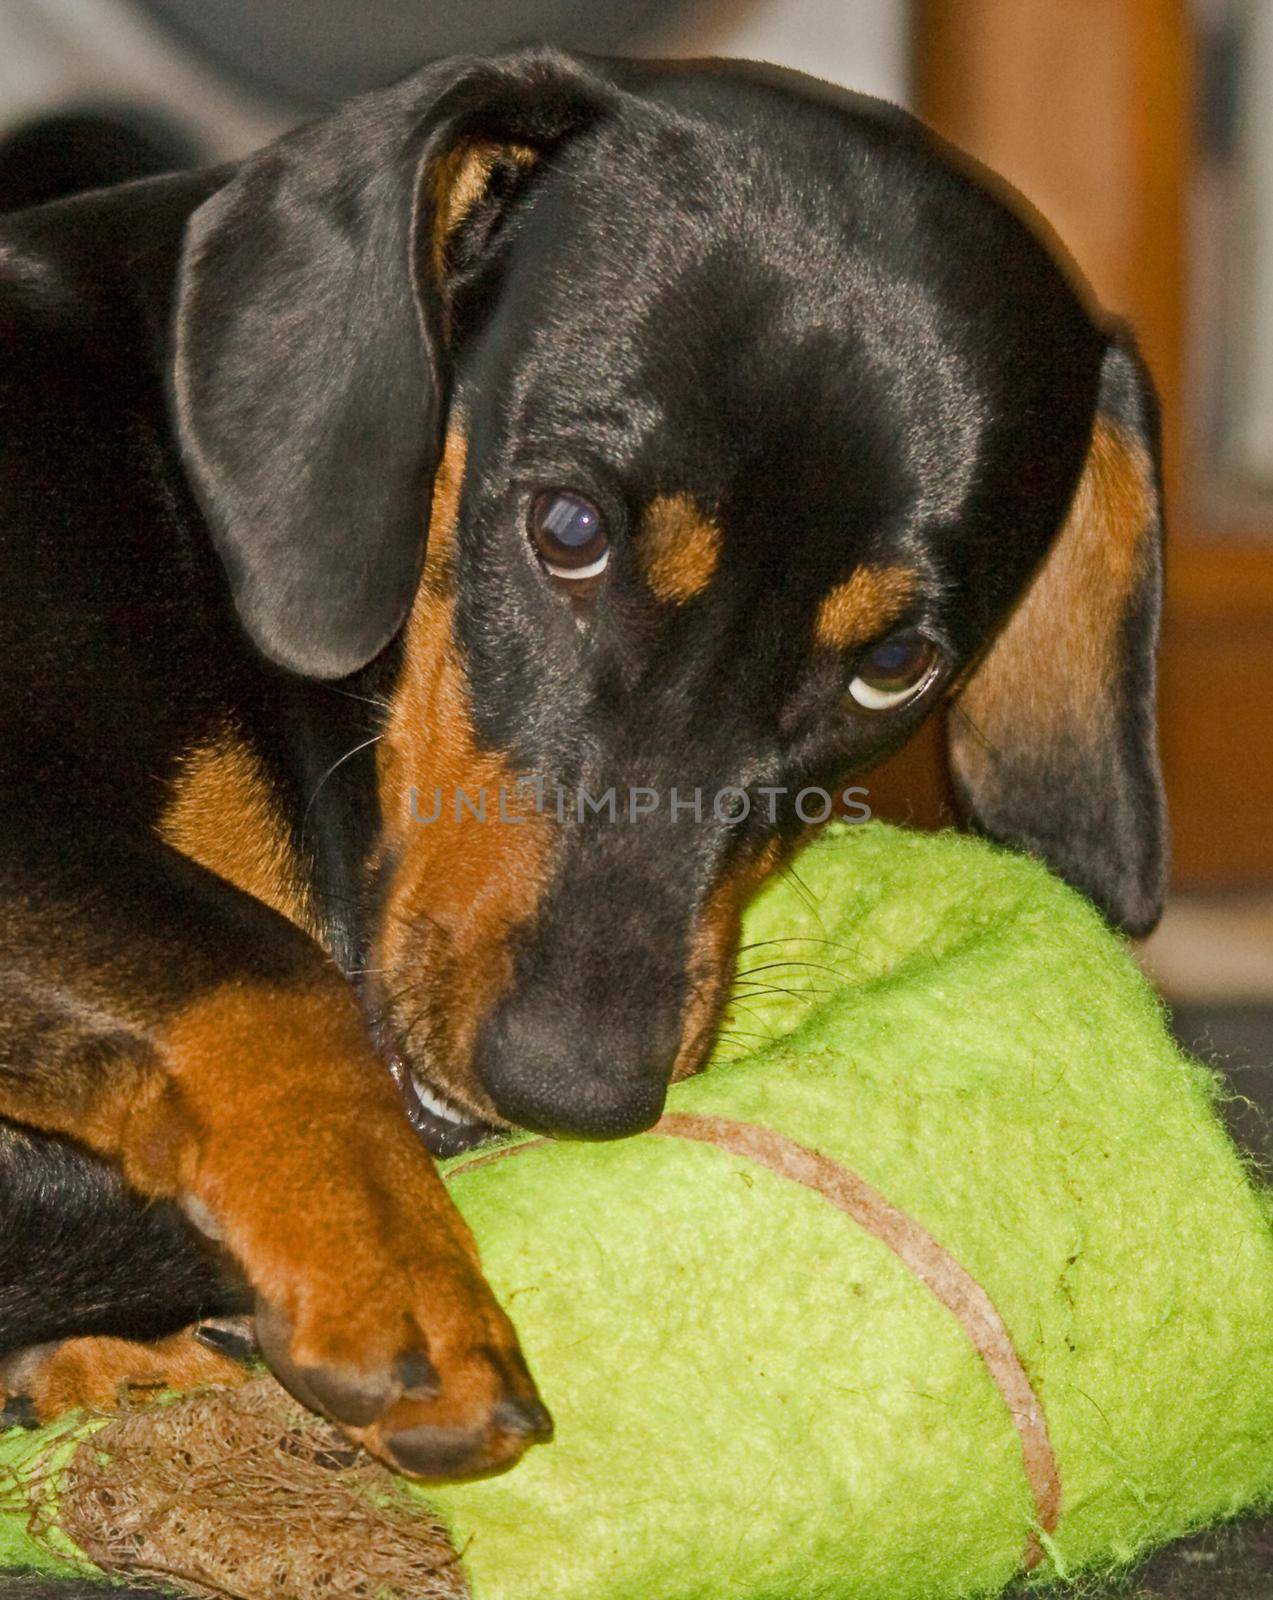 Young Dachshund with outsized tennis ball 0225 by kobus_peche